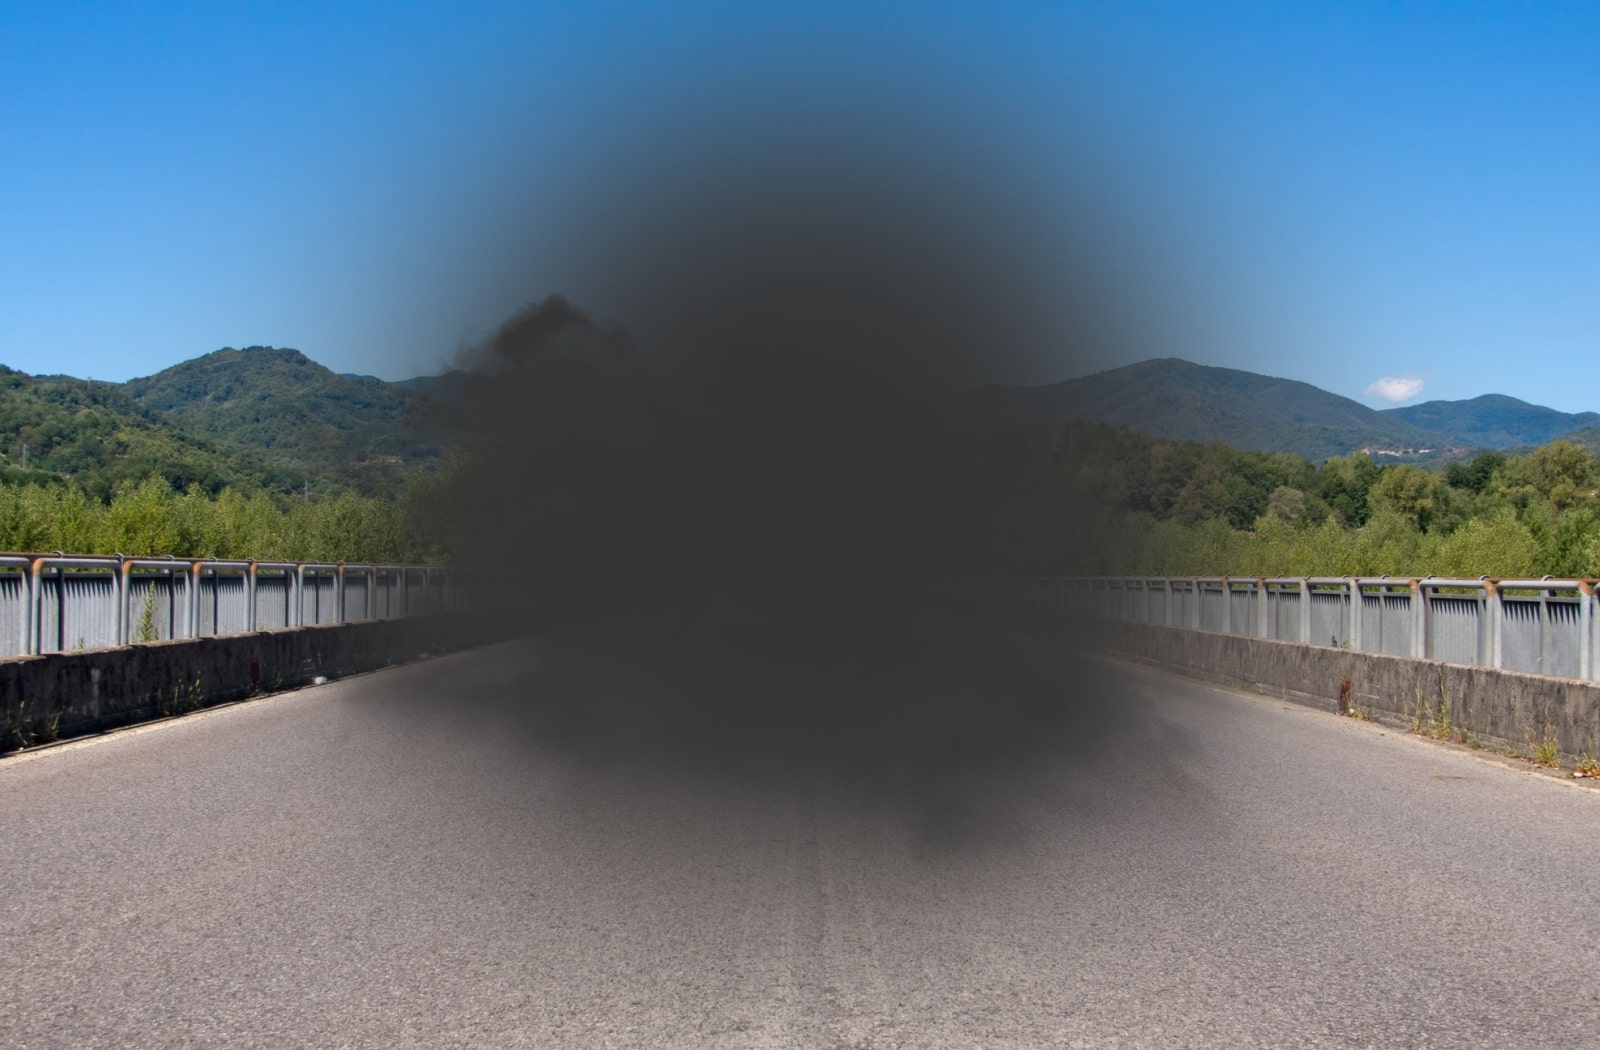 A view of a concrete bridge on a sunny day with a dark grey spot blocking central vision, representing the POV of a person with dry macular degeneration.